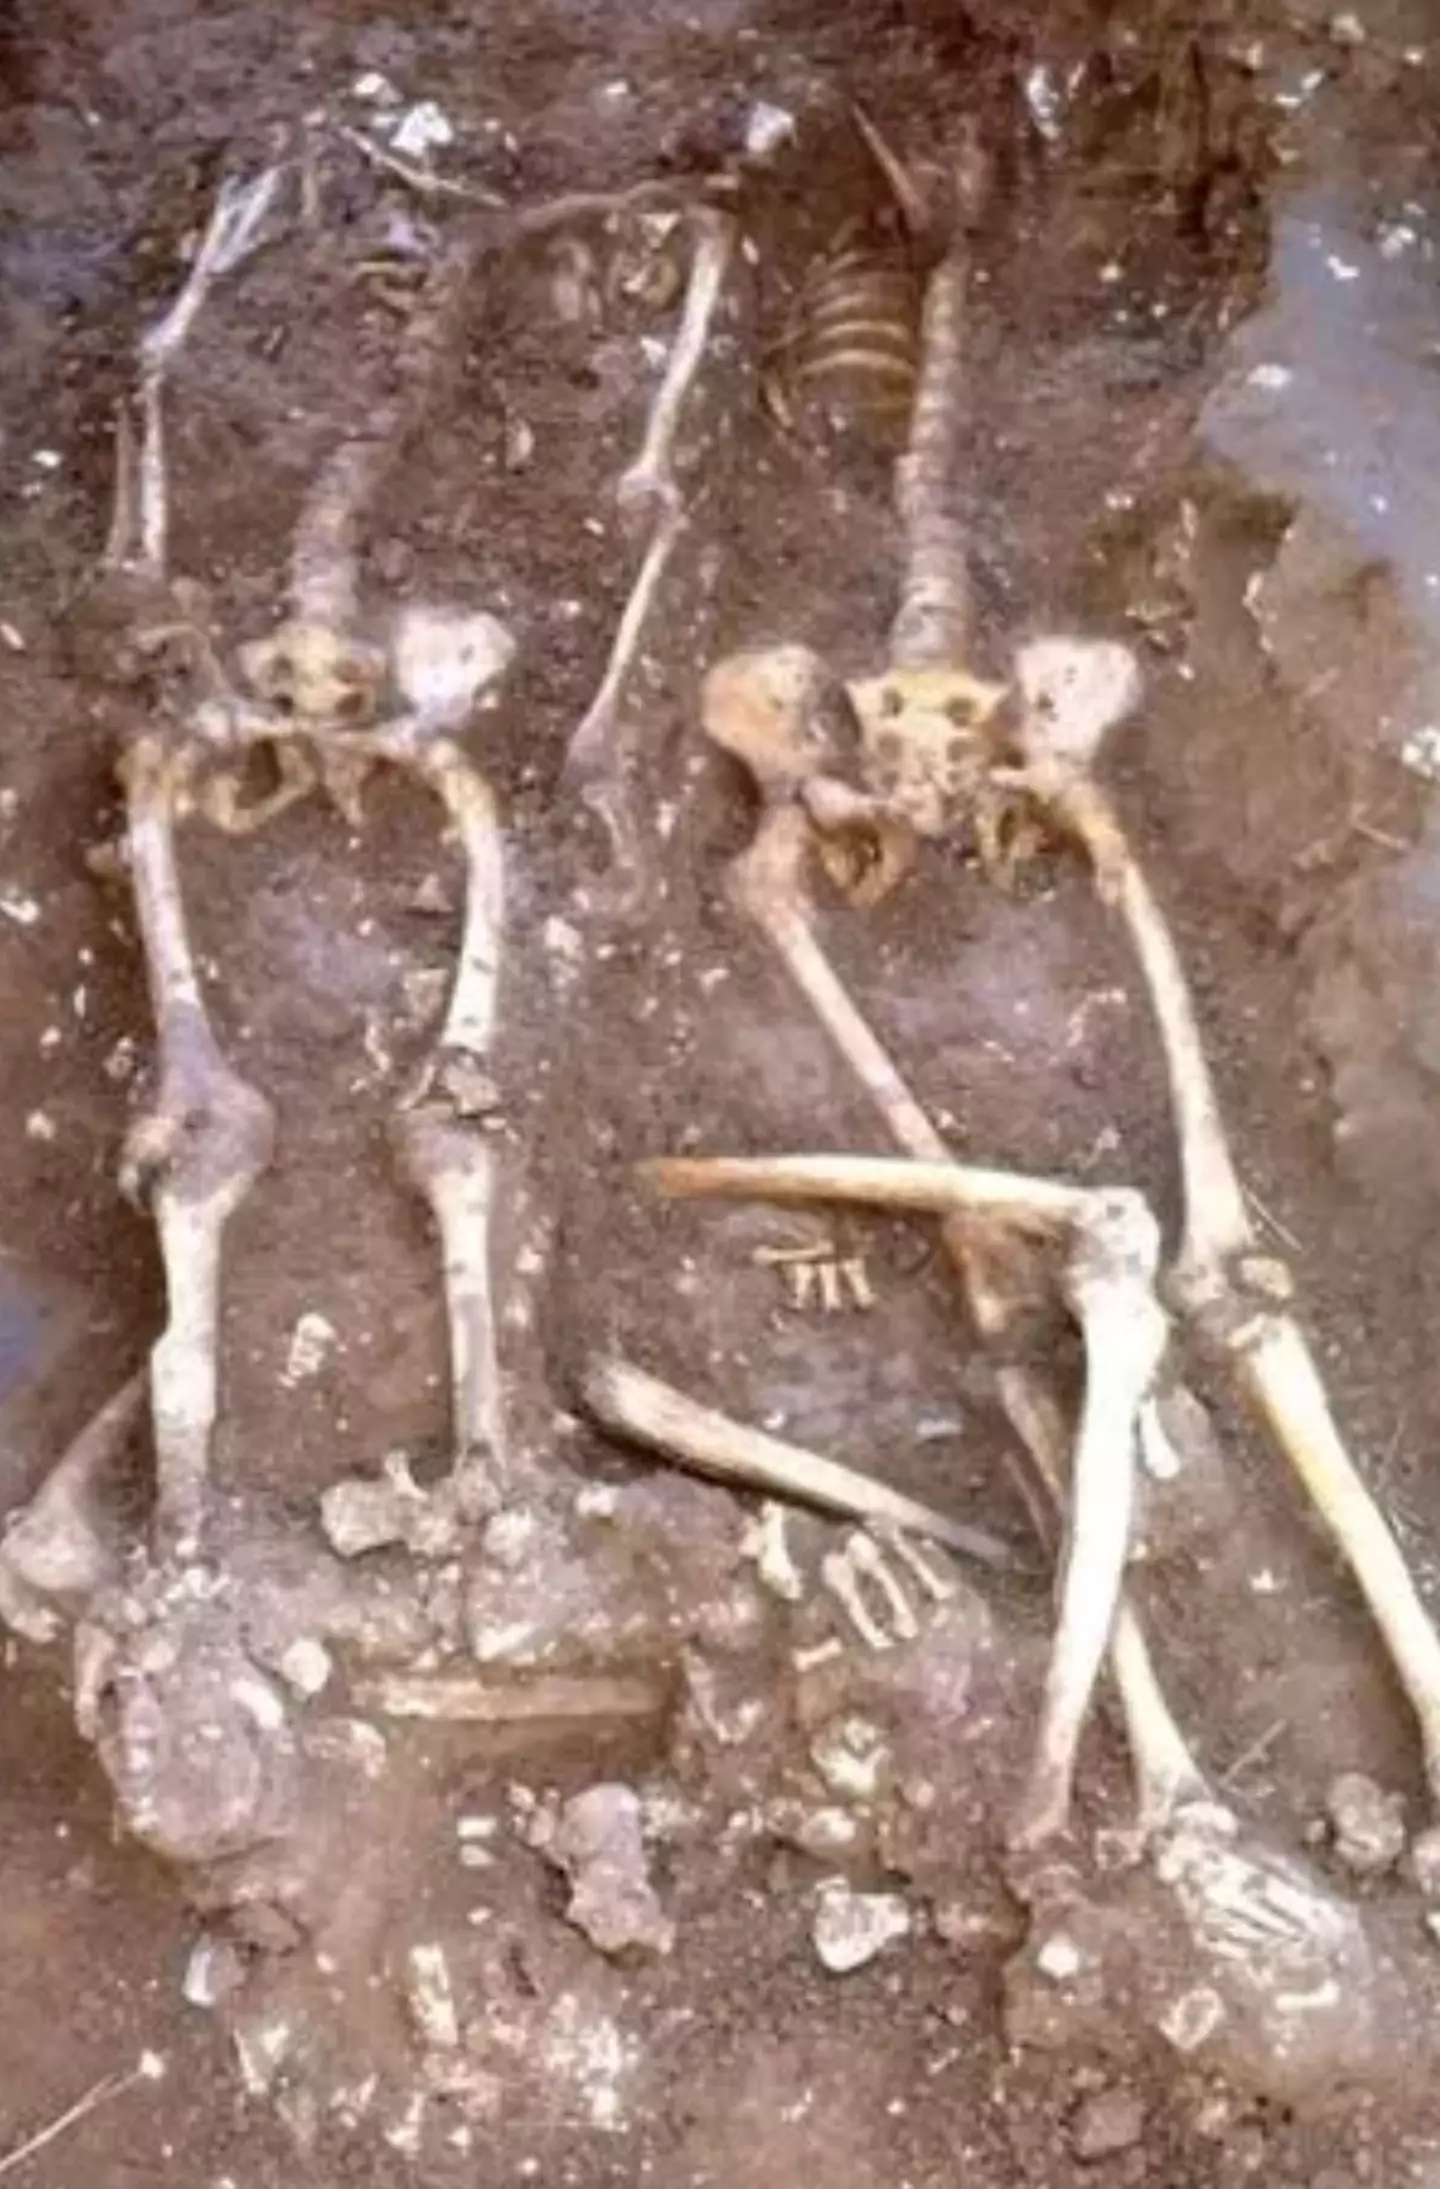 Some of the skeletons found at the site.